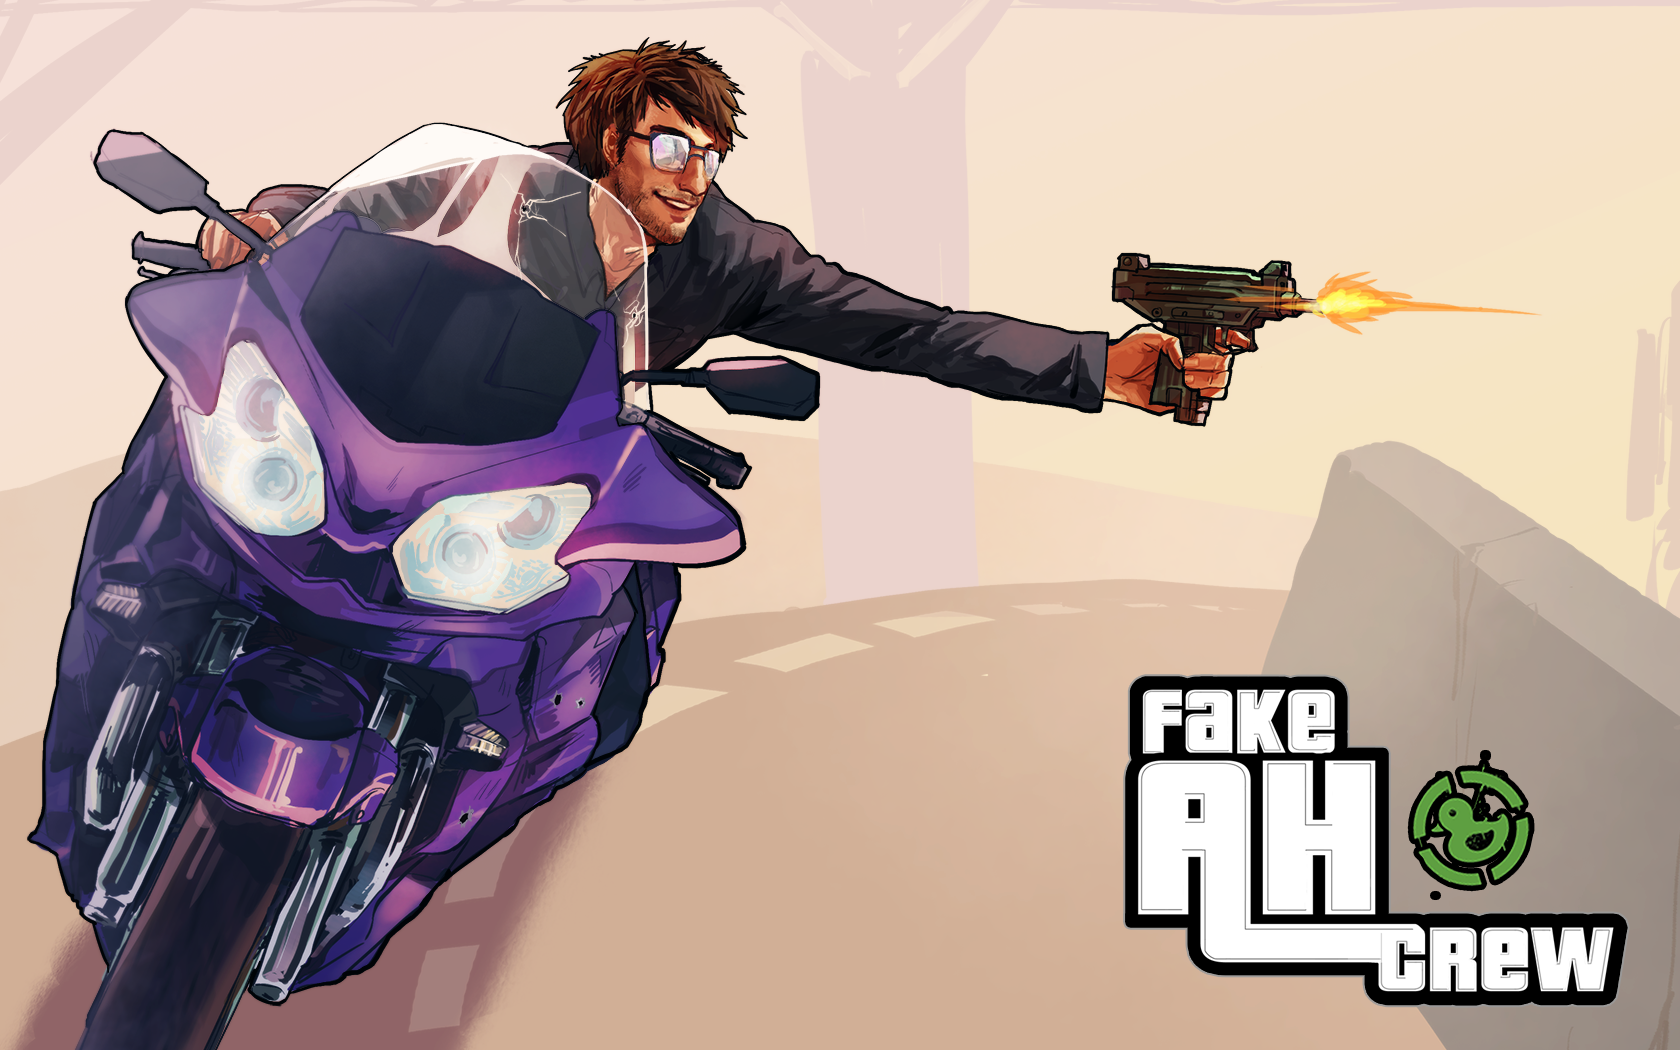 General 1680x1050 motorcycle weapon men Gavin Free Grand Theft Auto V Rooster Teeth vehicle Purple Motorcycles video games